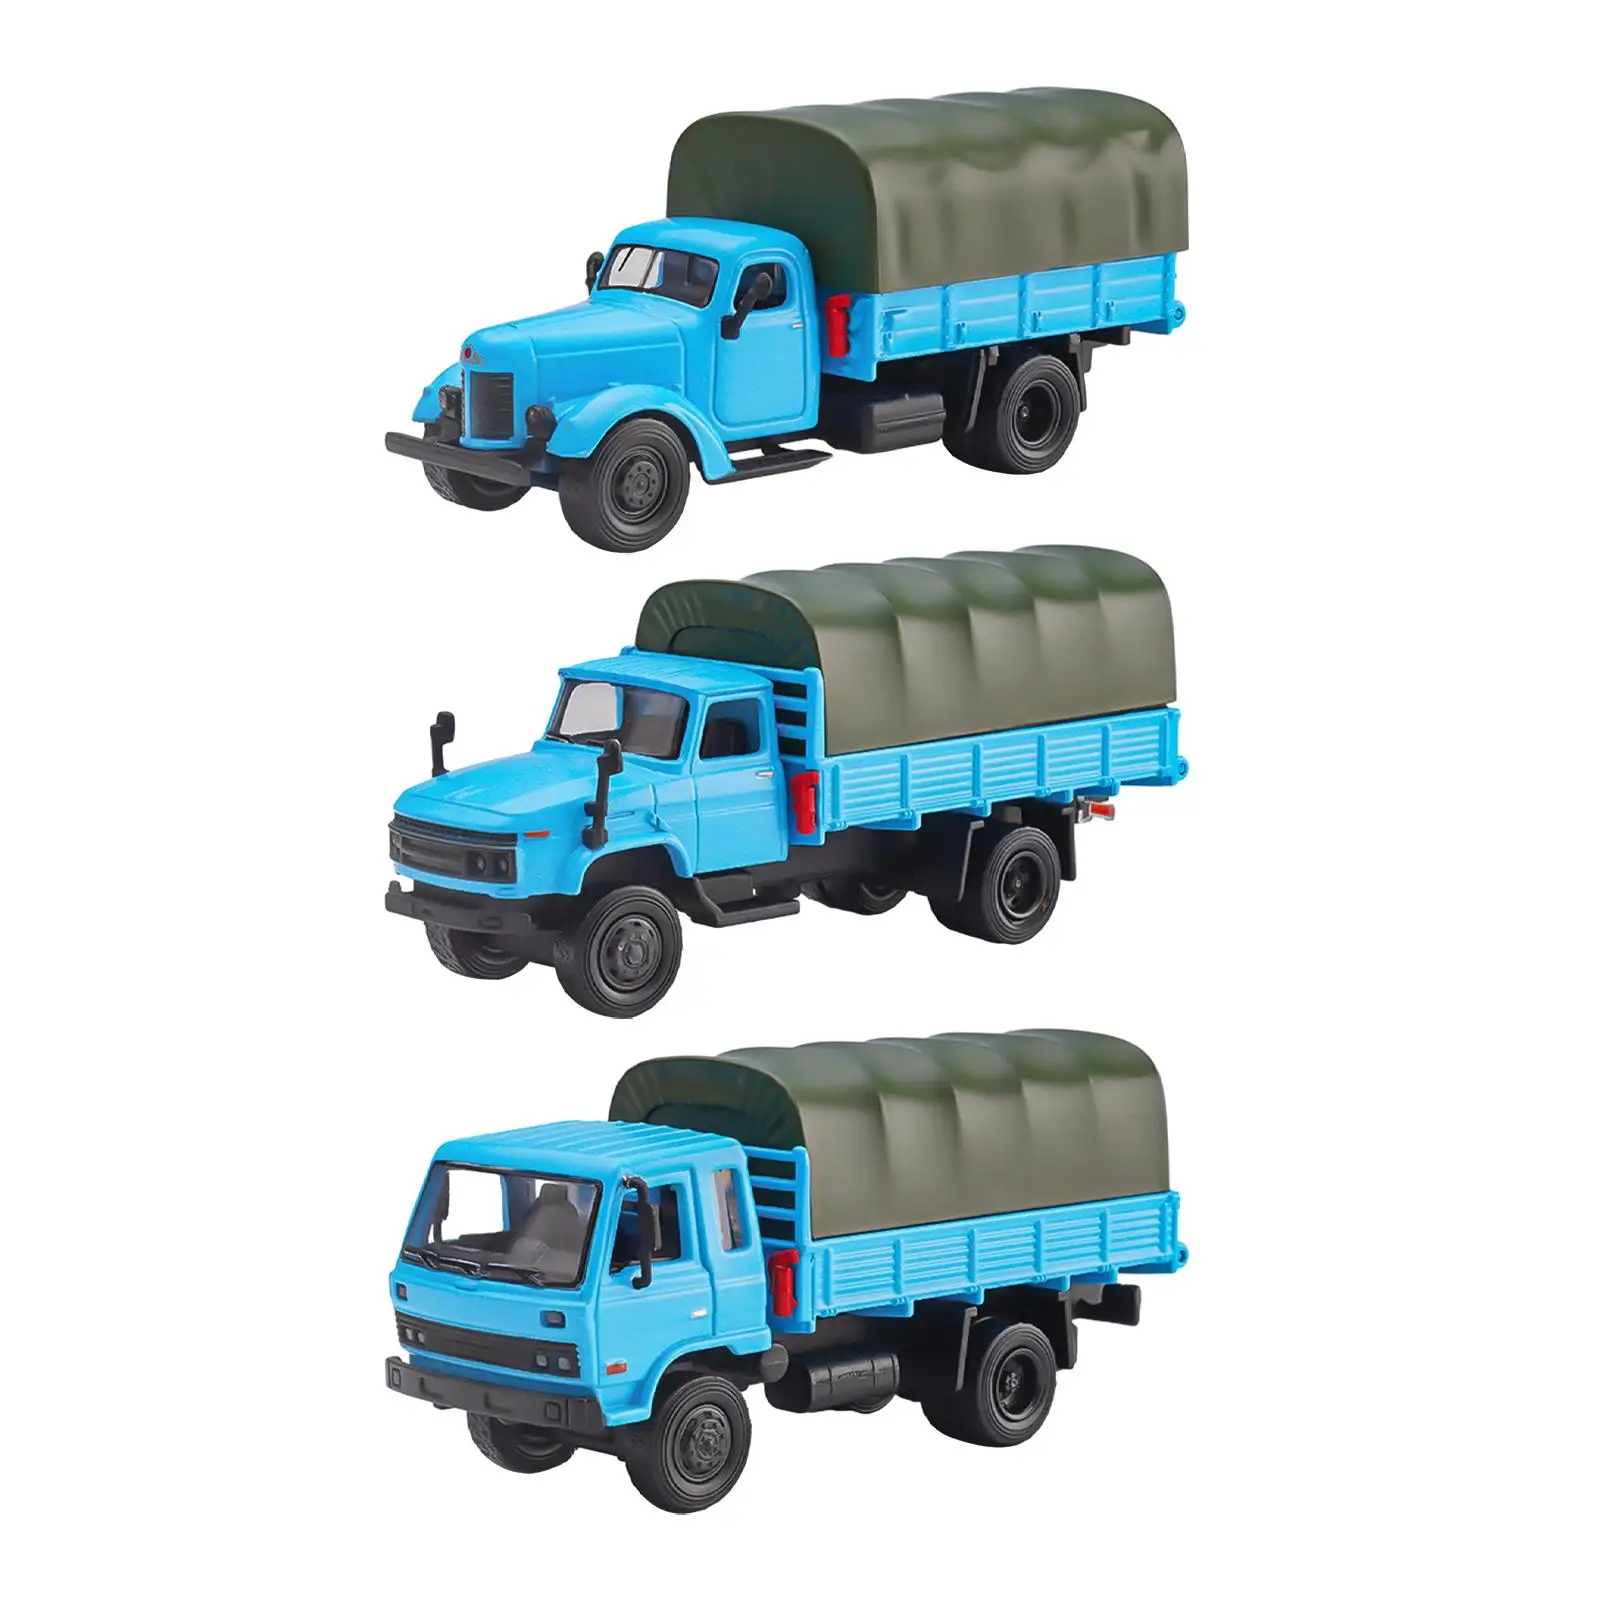 1/64 Transport Vehicle Diorama Scenery Model Car for Kids Adults Decoration